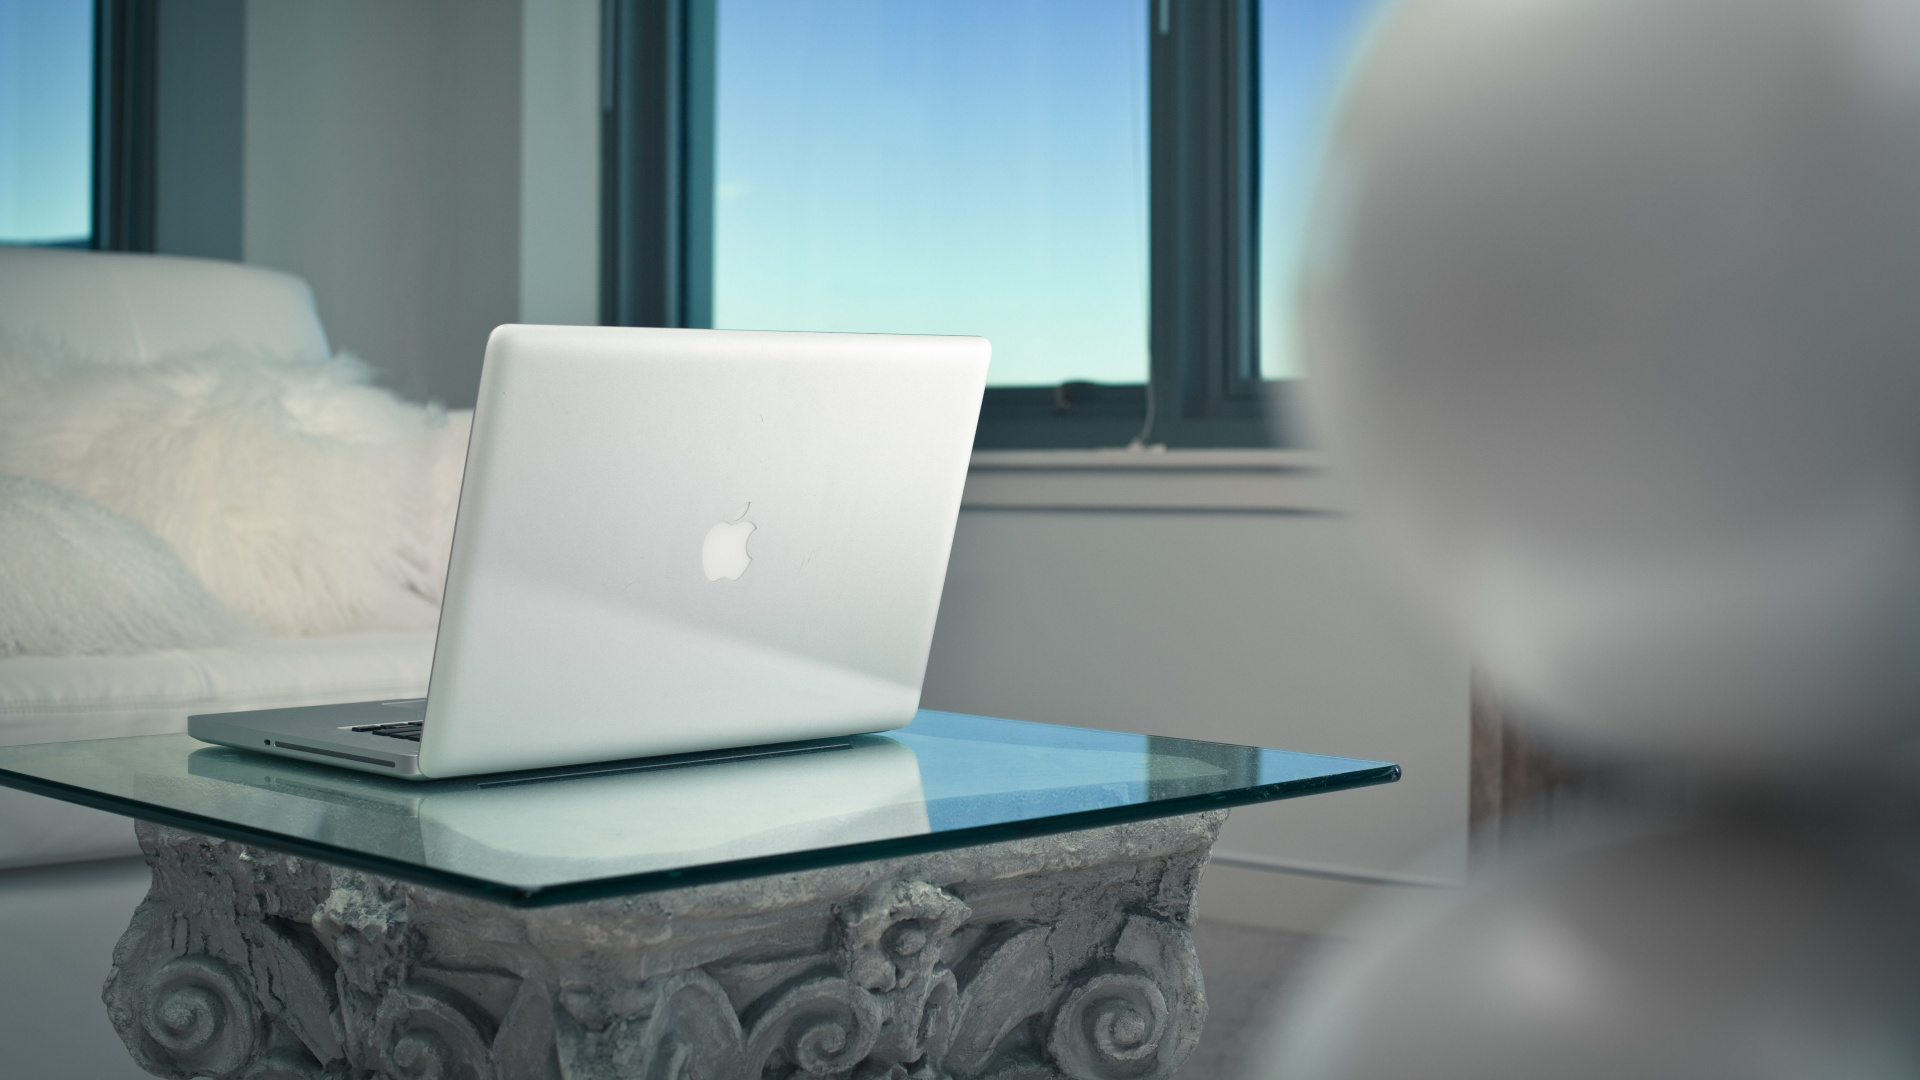 Silver Macbook on Green Table. Wallpaper in 1920x1080 Resolution